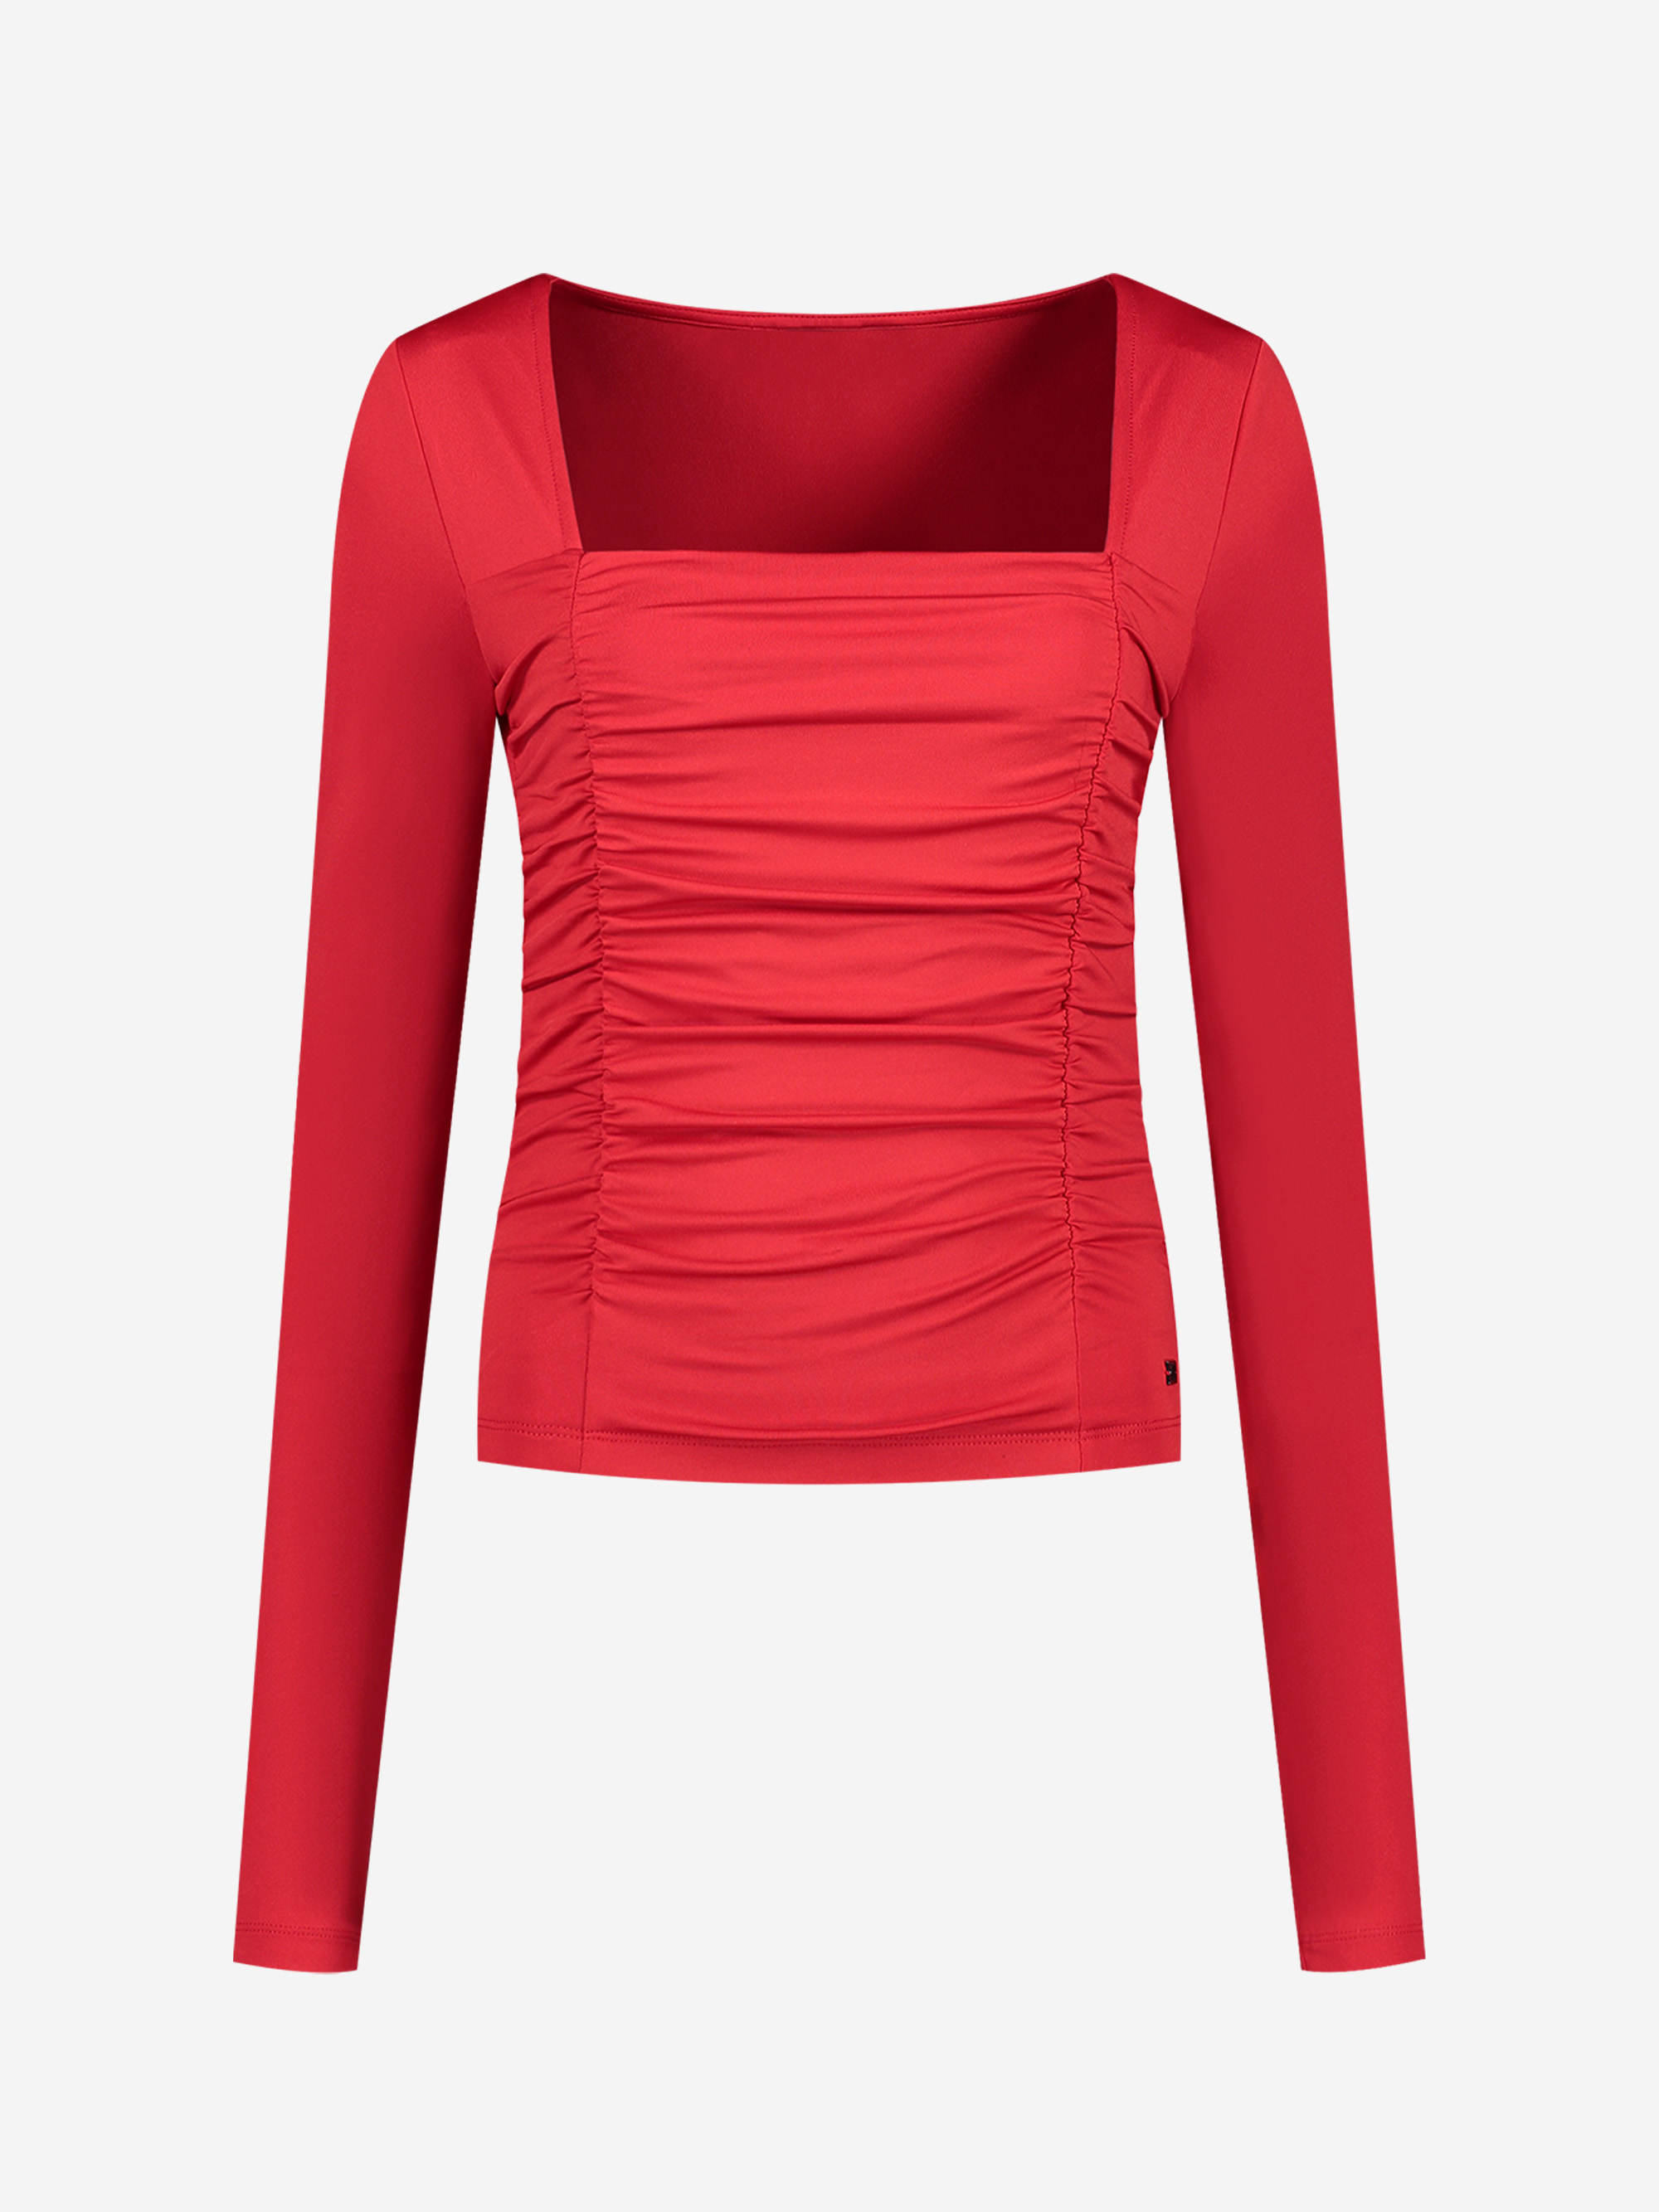 Fitted top with square neckline